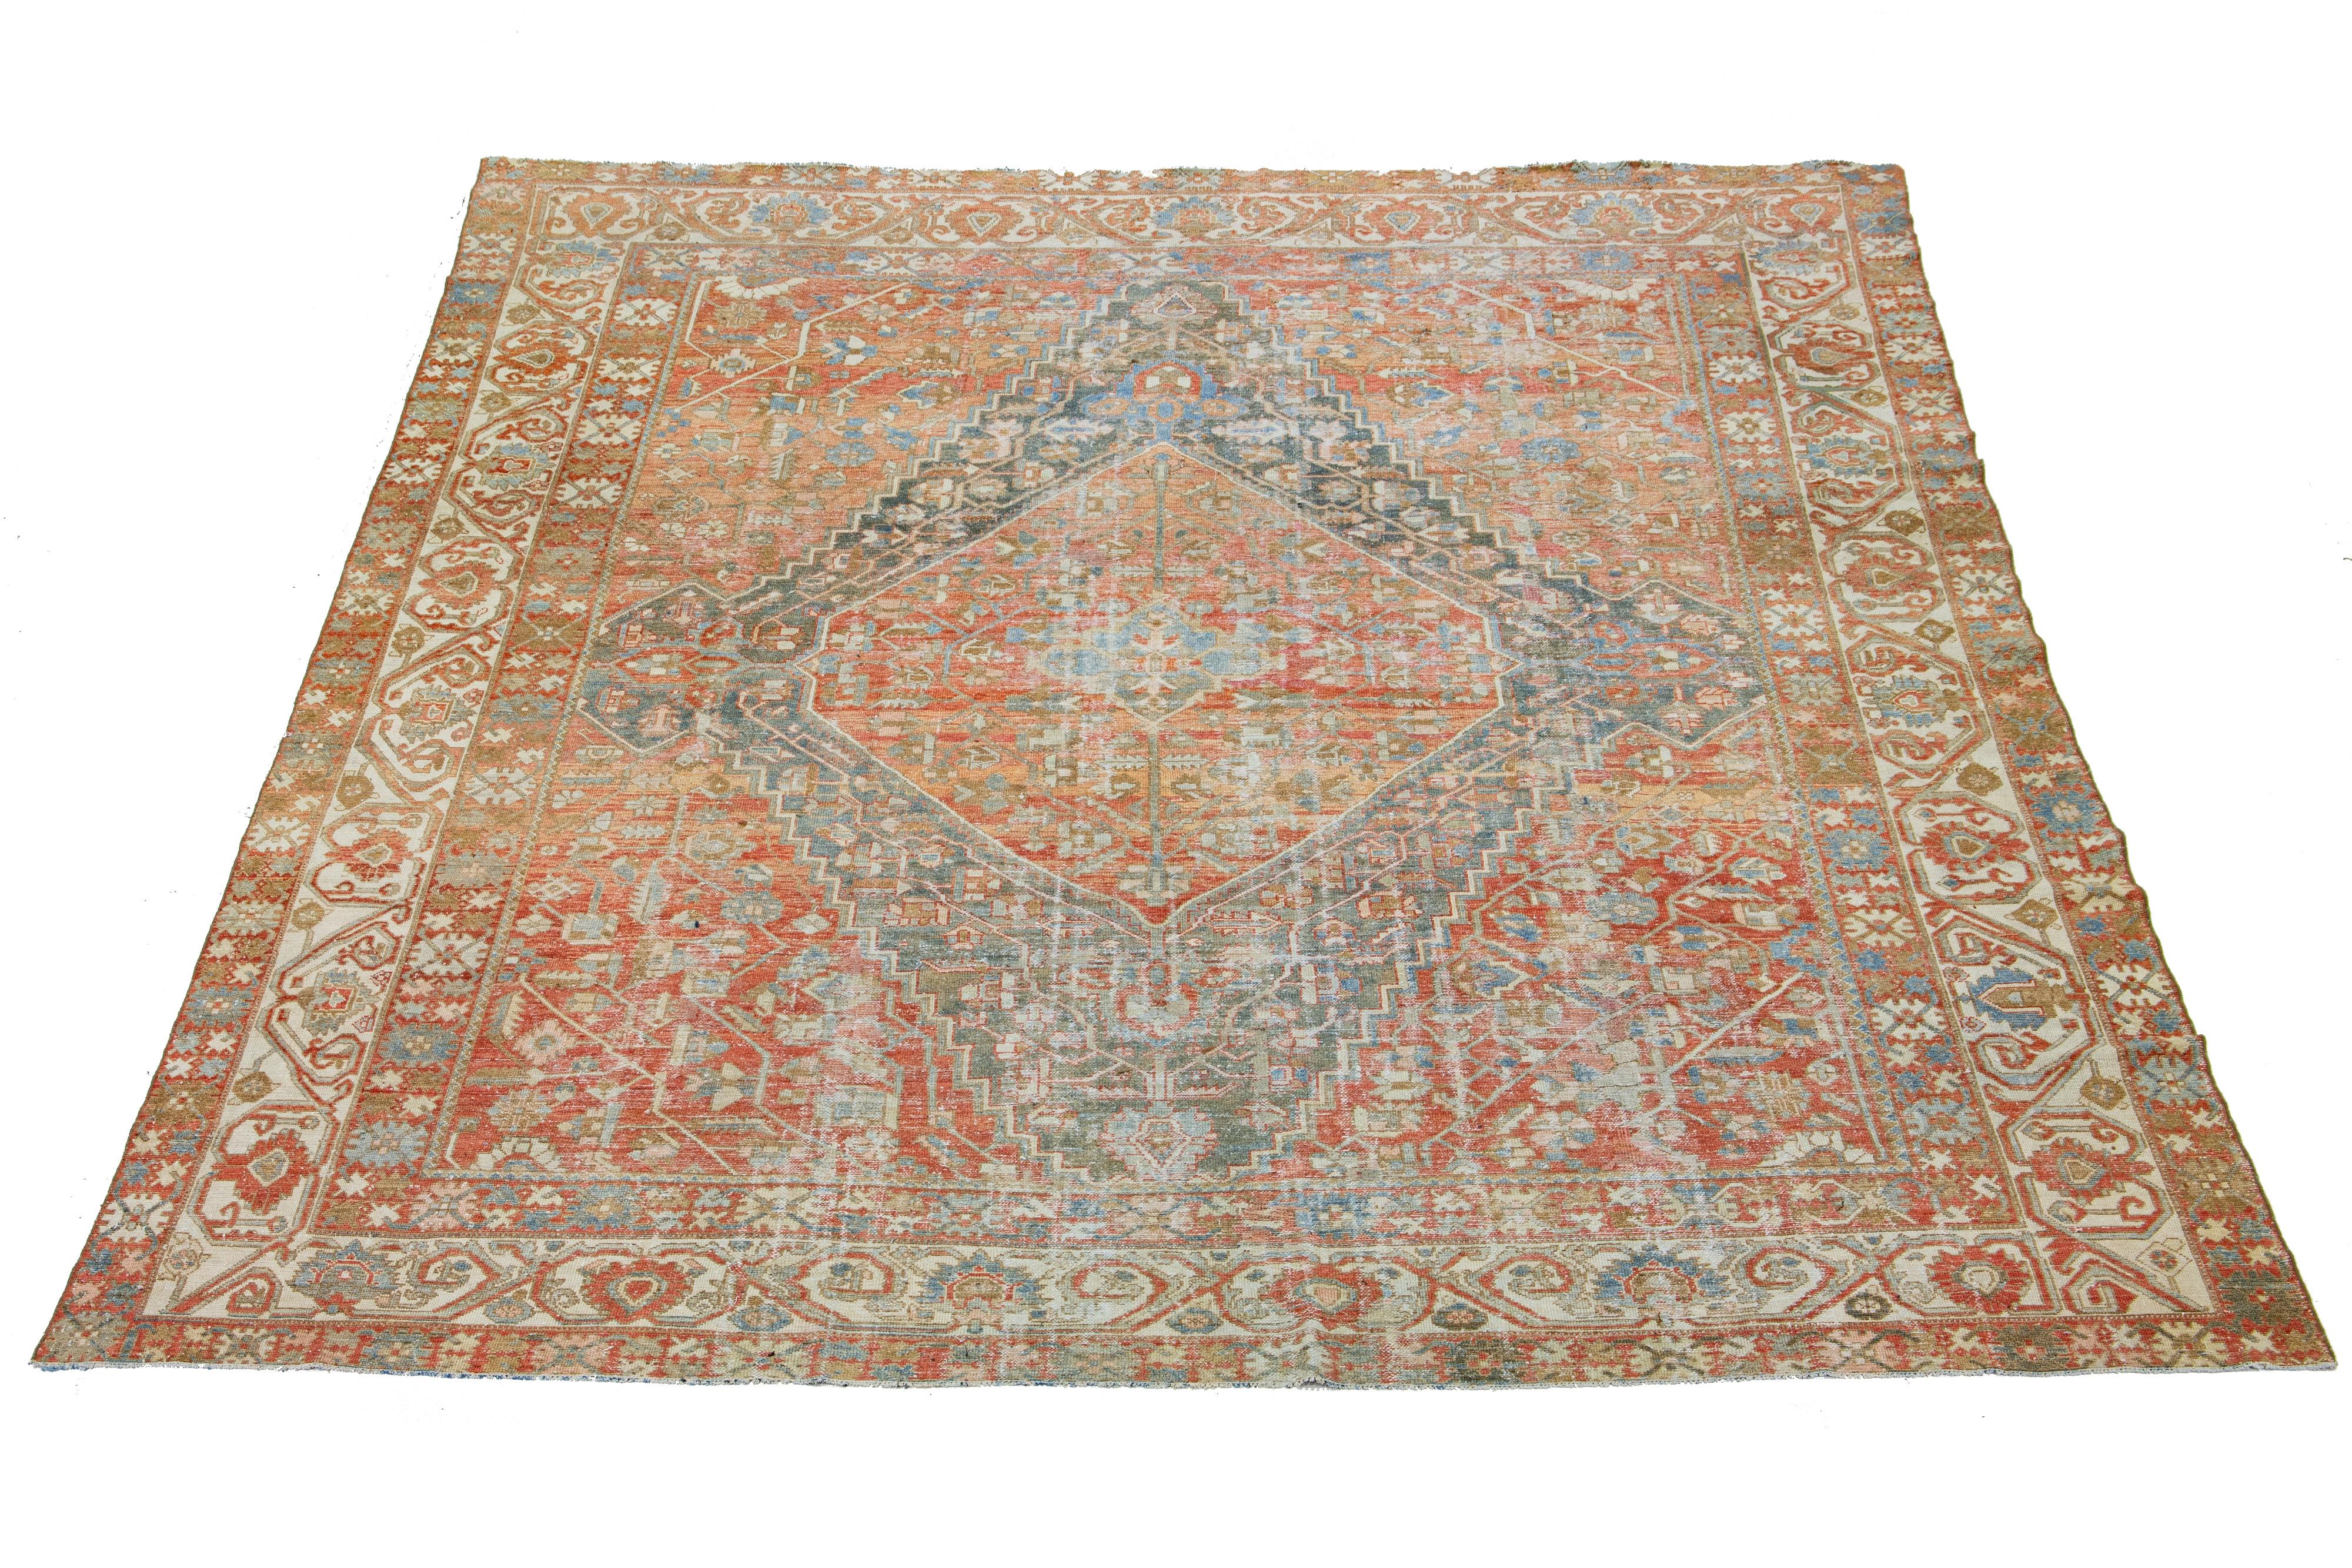 Beautiful Antique Bakhtiari hand-knotted wool rug with a red-rust color field. This Persian piece has a classic geometric floral design in beige and blue colors.

This rug measures 11' x 12'5